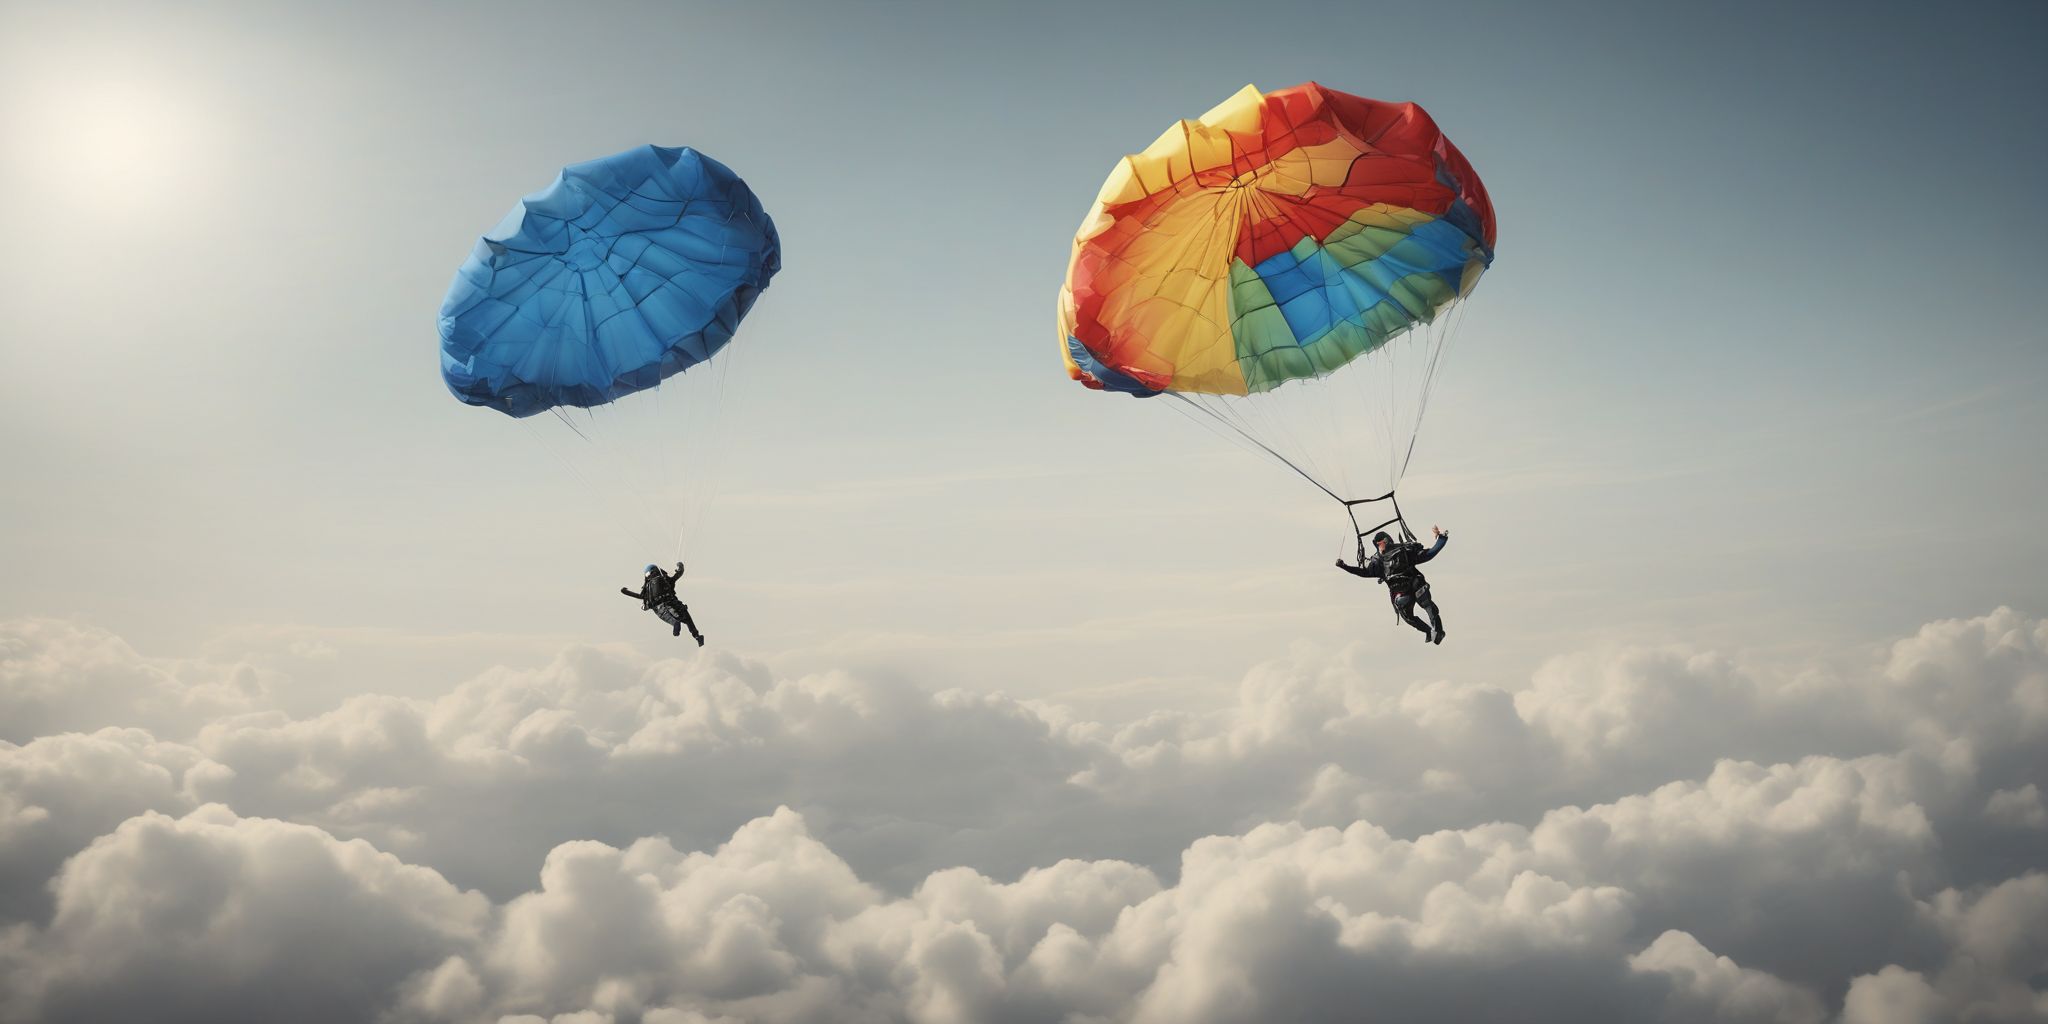 Risk-free parachute  in realistic, photographic style